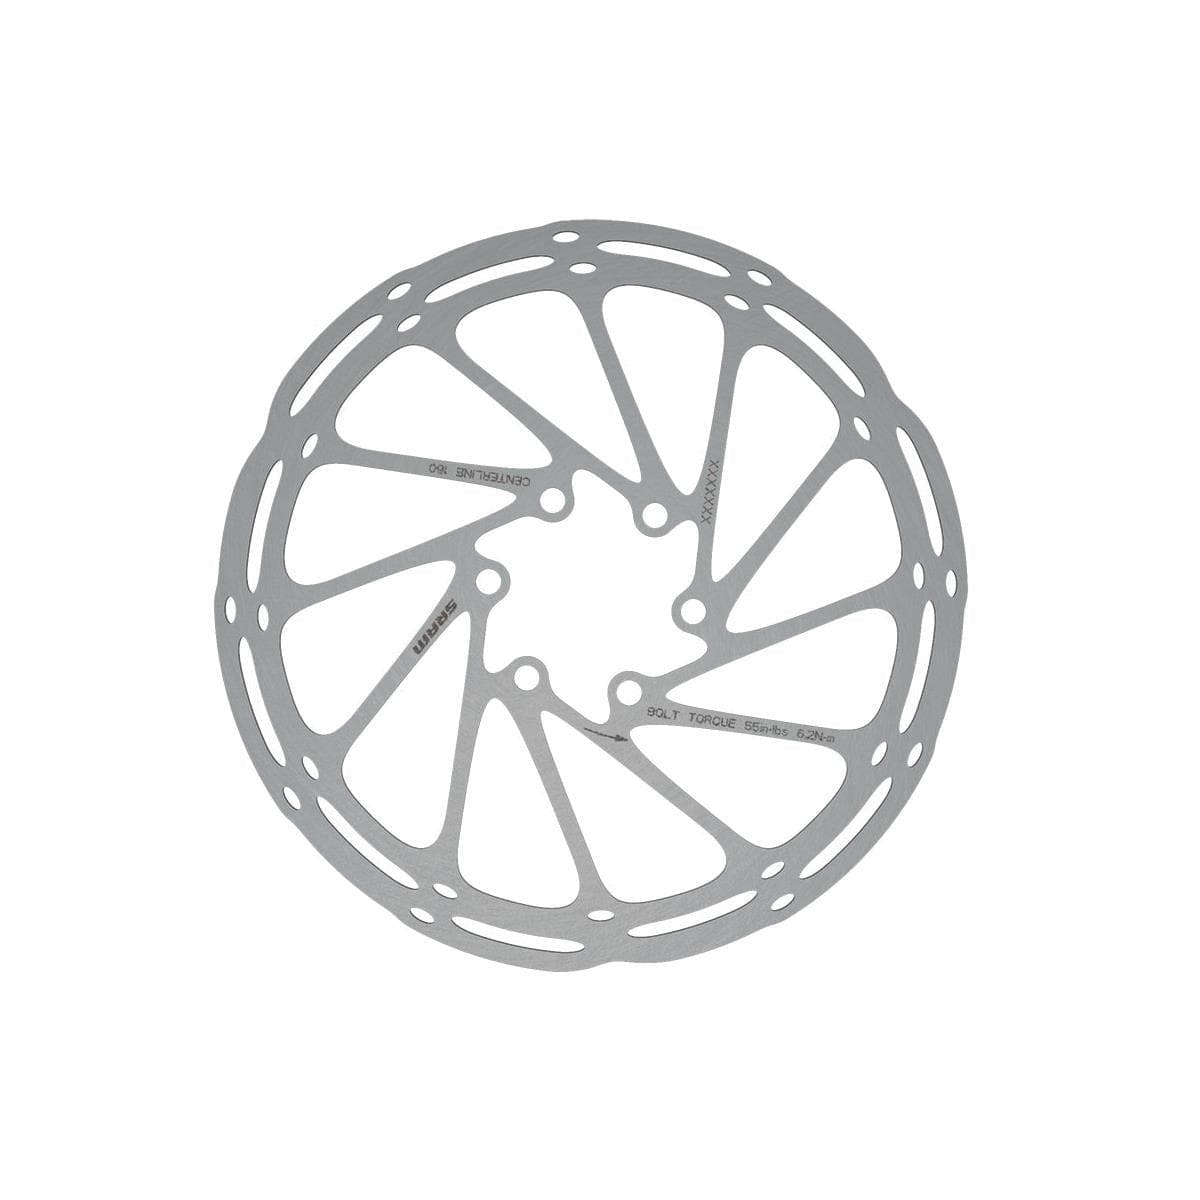 Sram Rotor - Centerline Rounded (Includes Steel Rotor Bolts):  180Mm